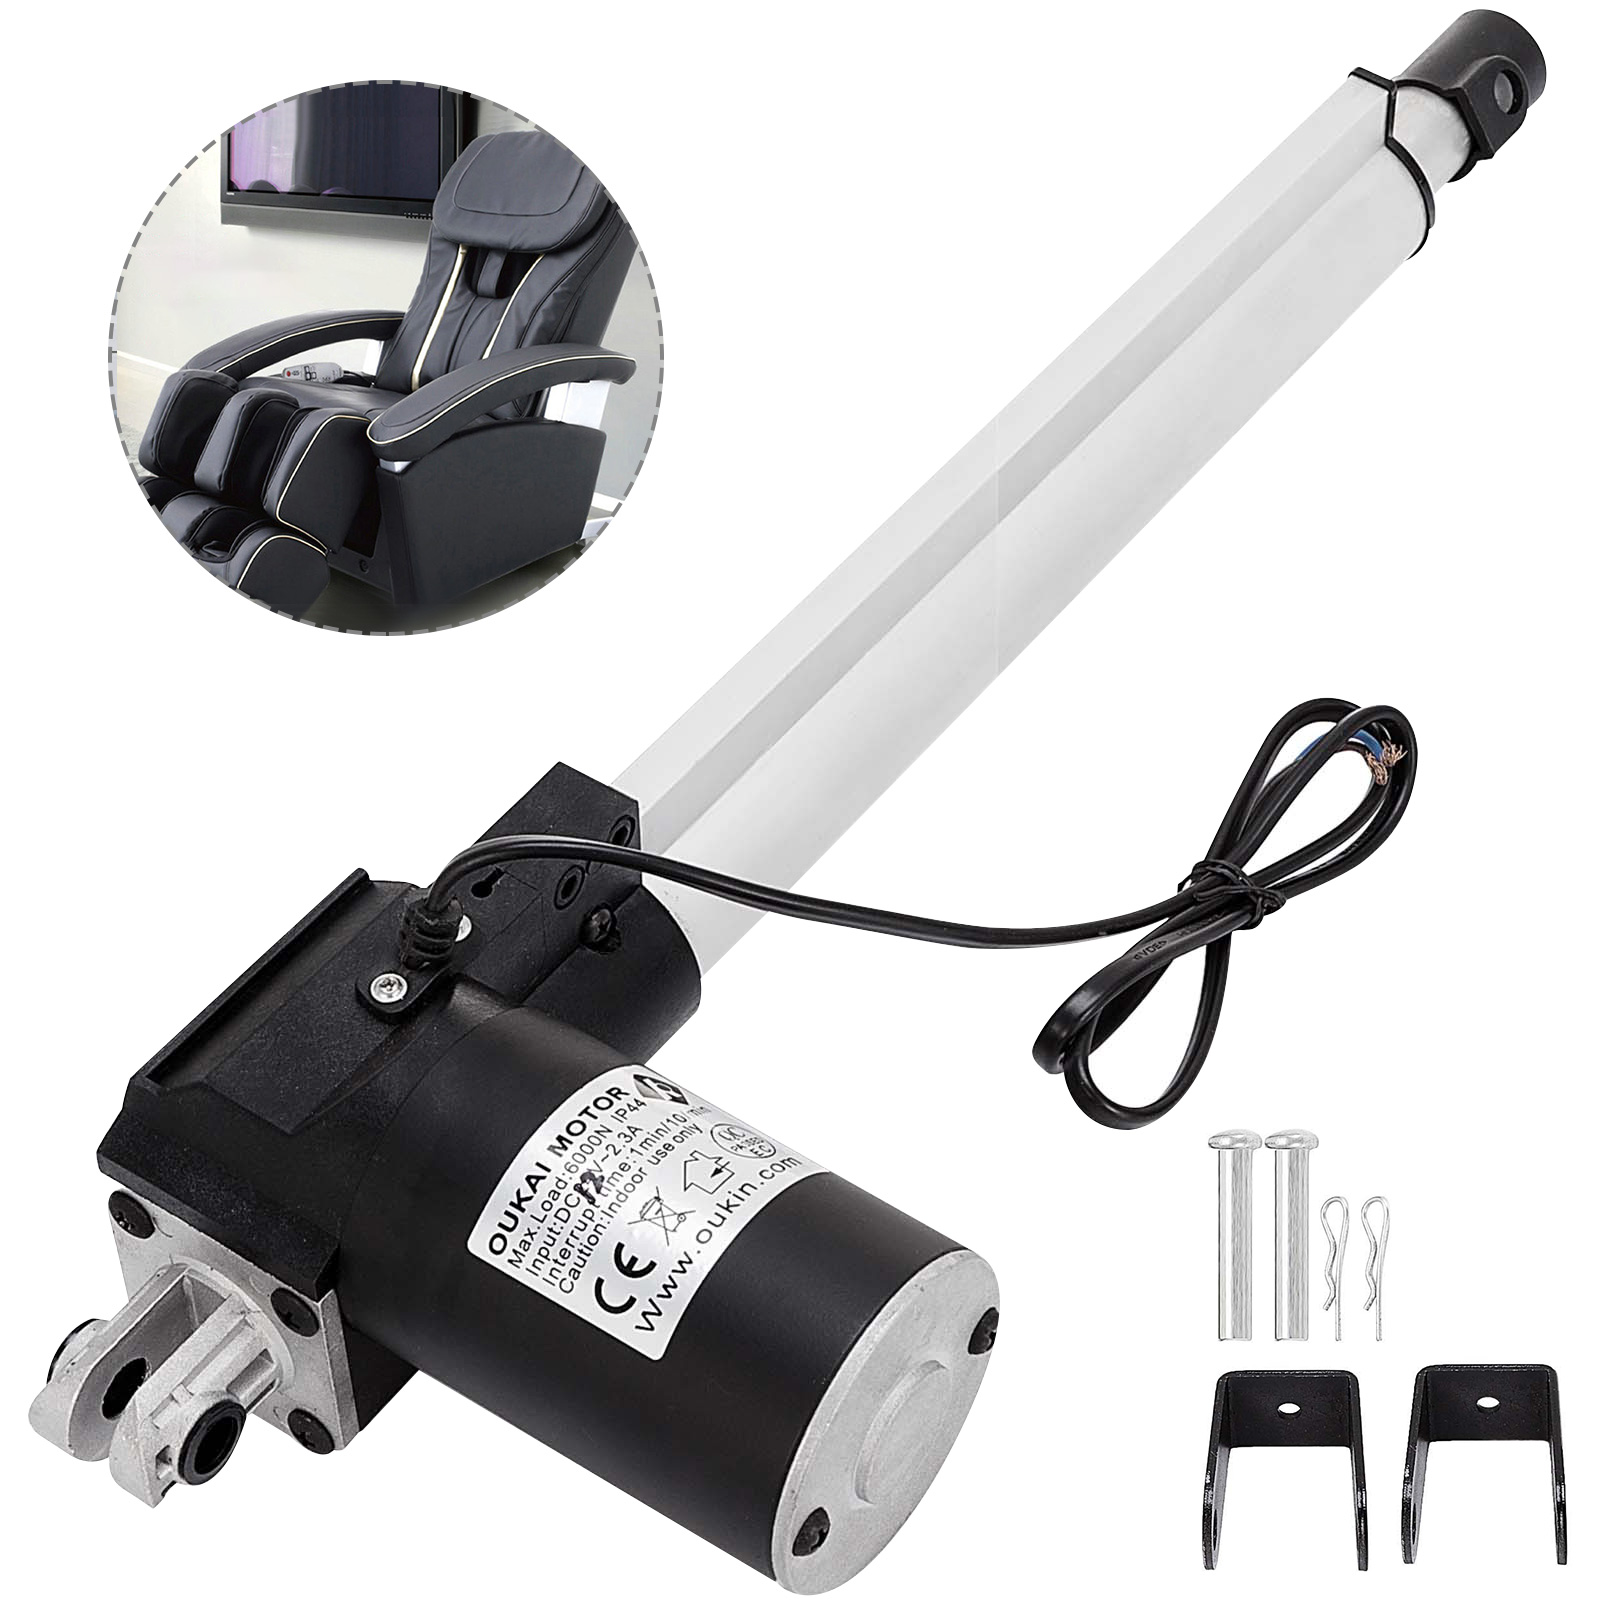 DC12V 2"-18" Heavy Duty Linear Actuator Electric Motor for Medical Lift Auto Car 